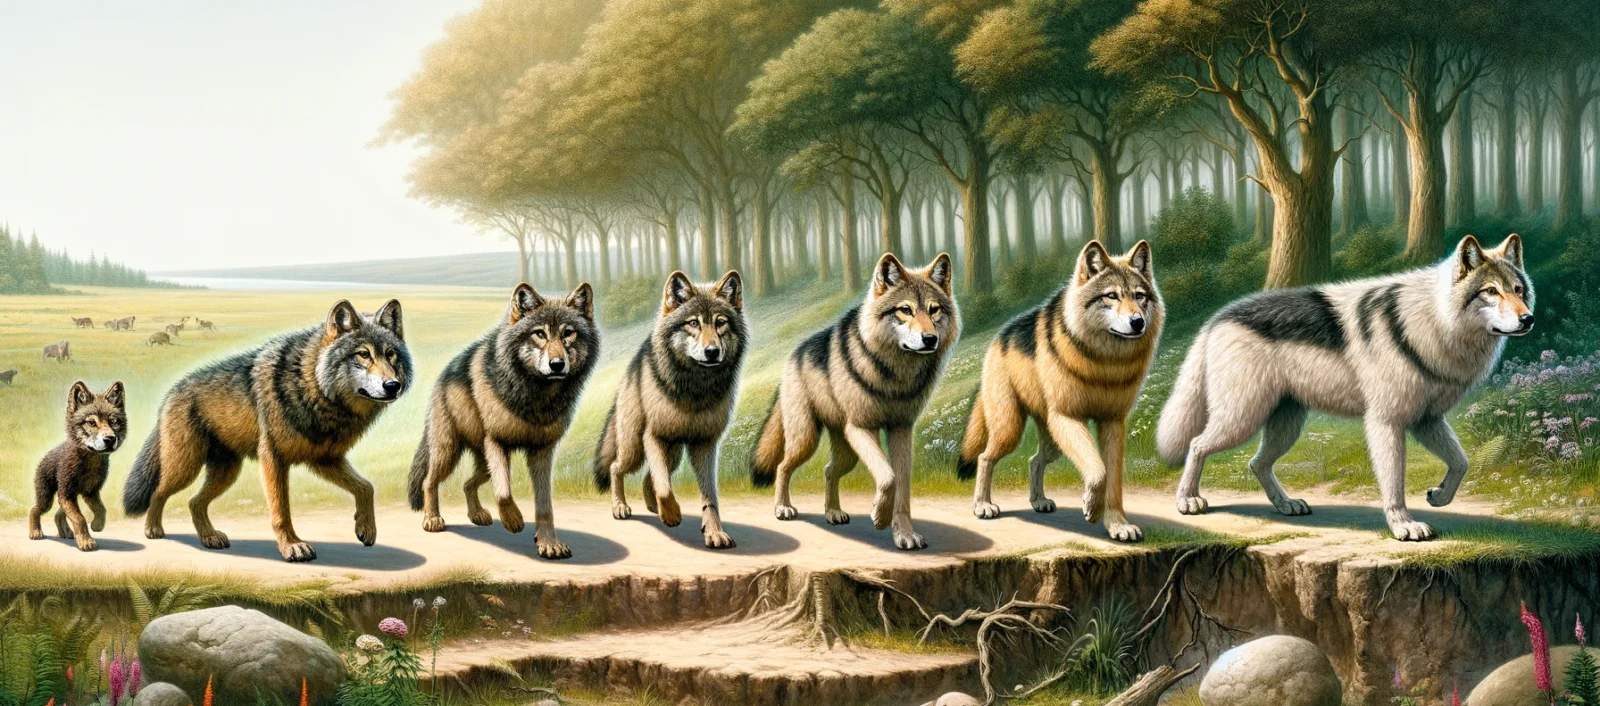 Wolf-to-dog: same species, dogs are a subspecies